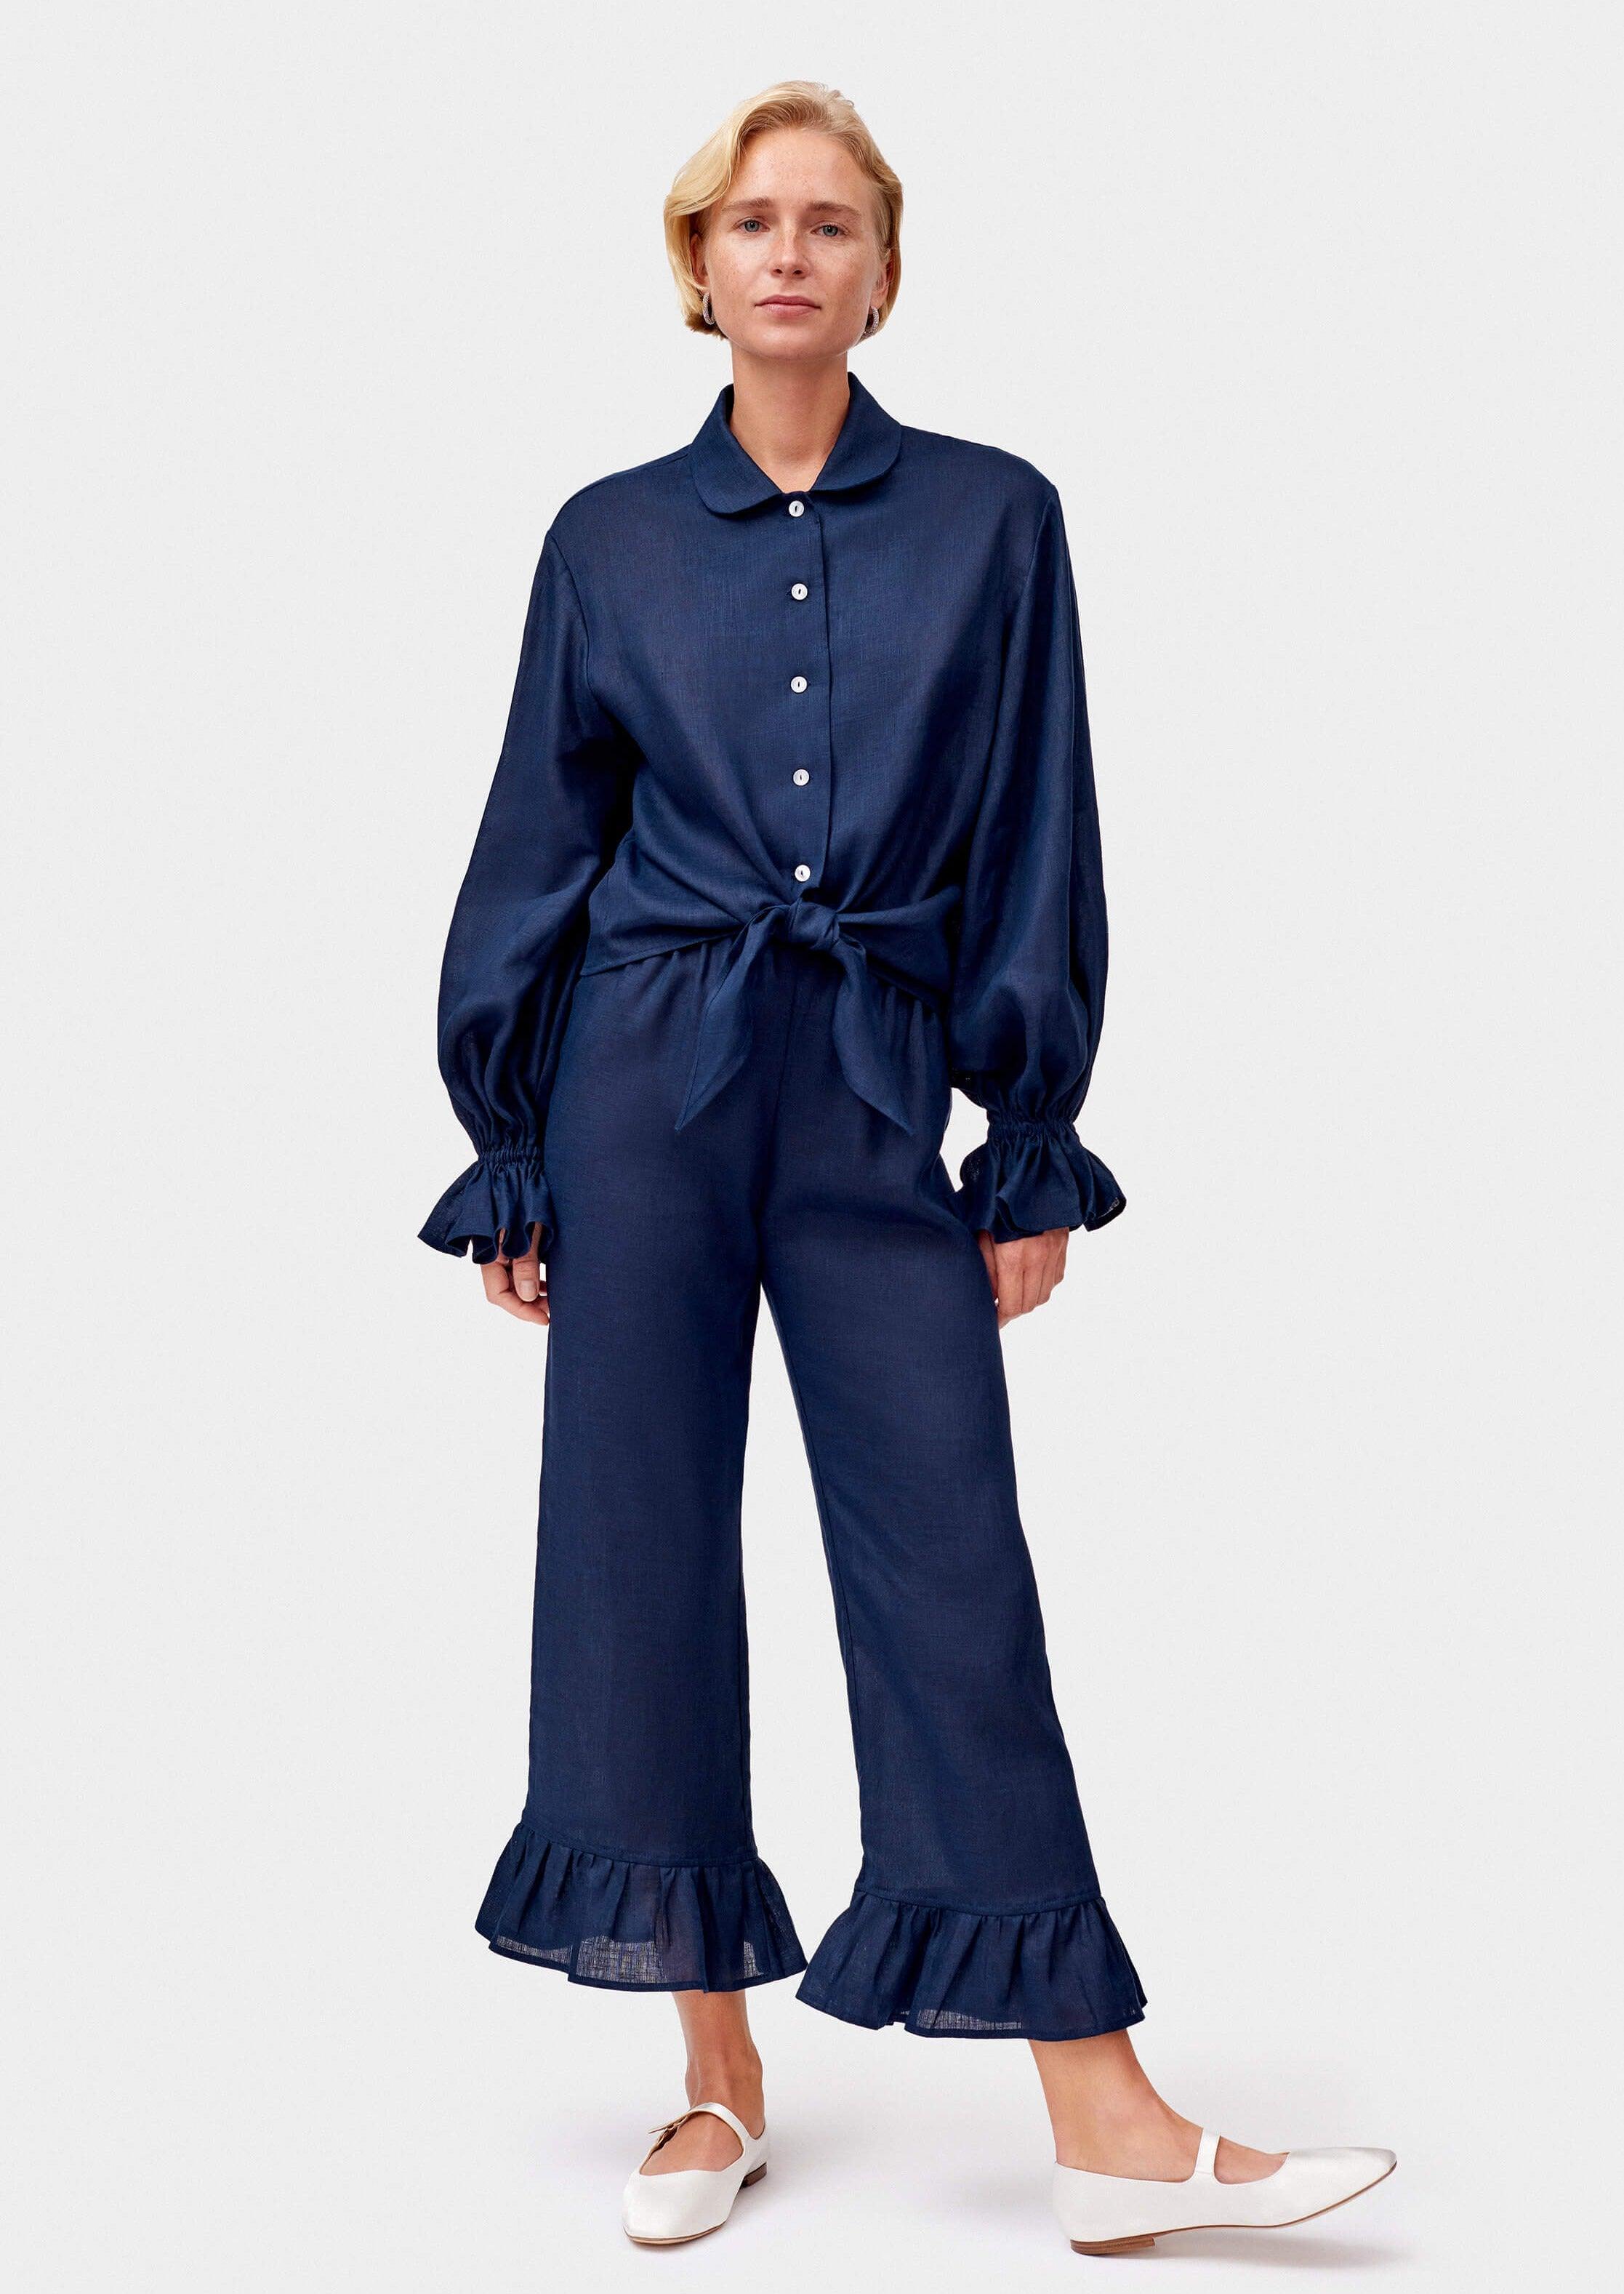 Linen OutDazl in Navy Lounge Rumba Sleeper – Suit